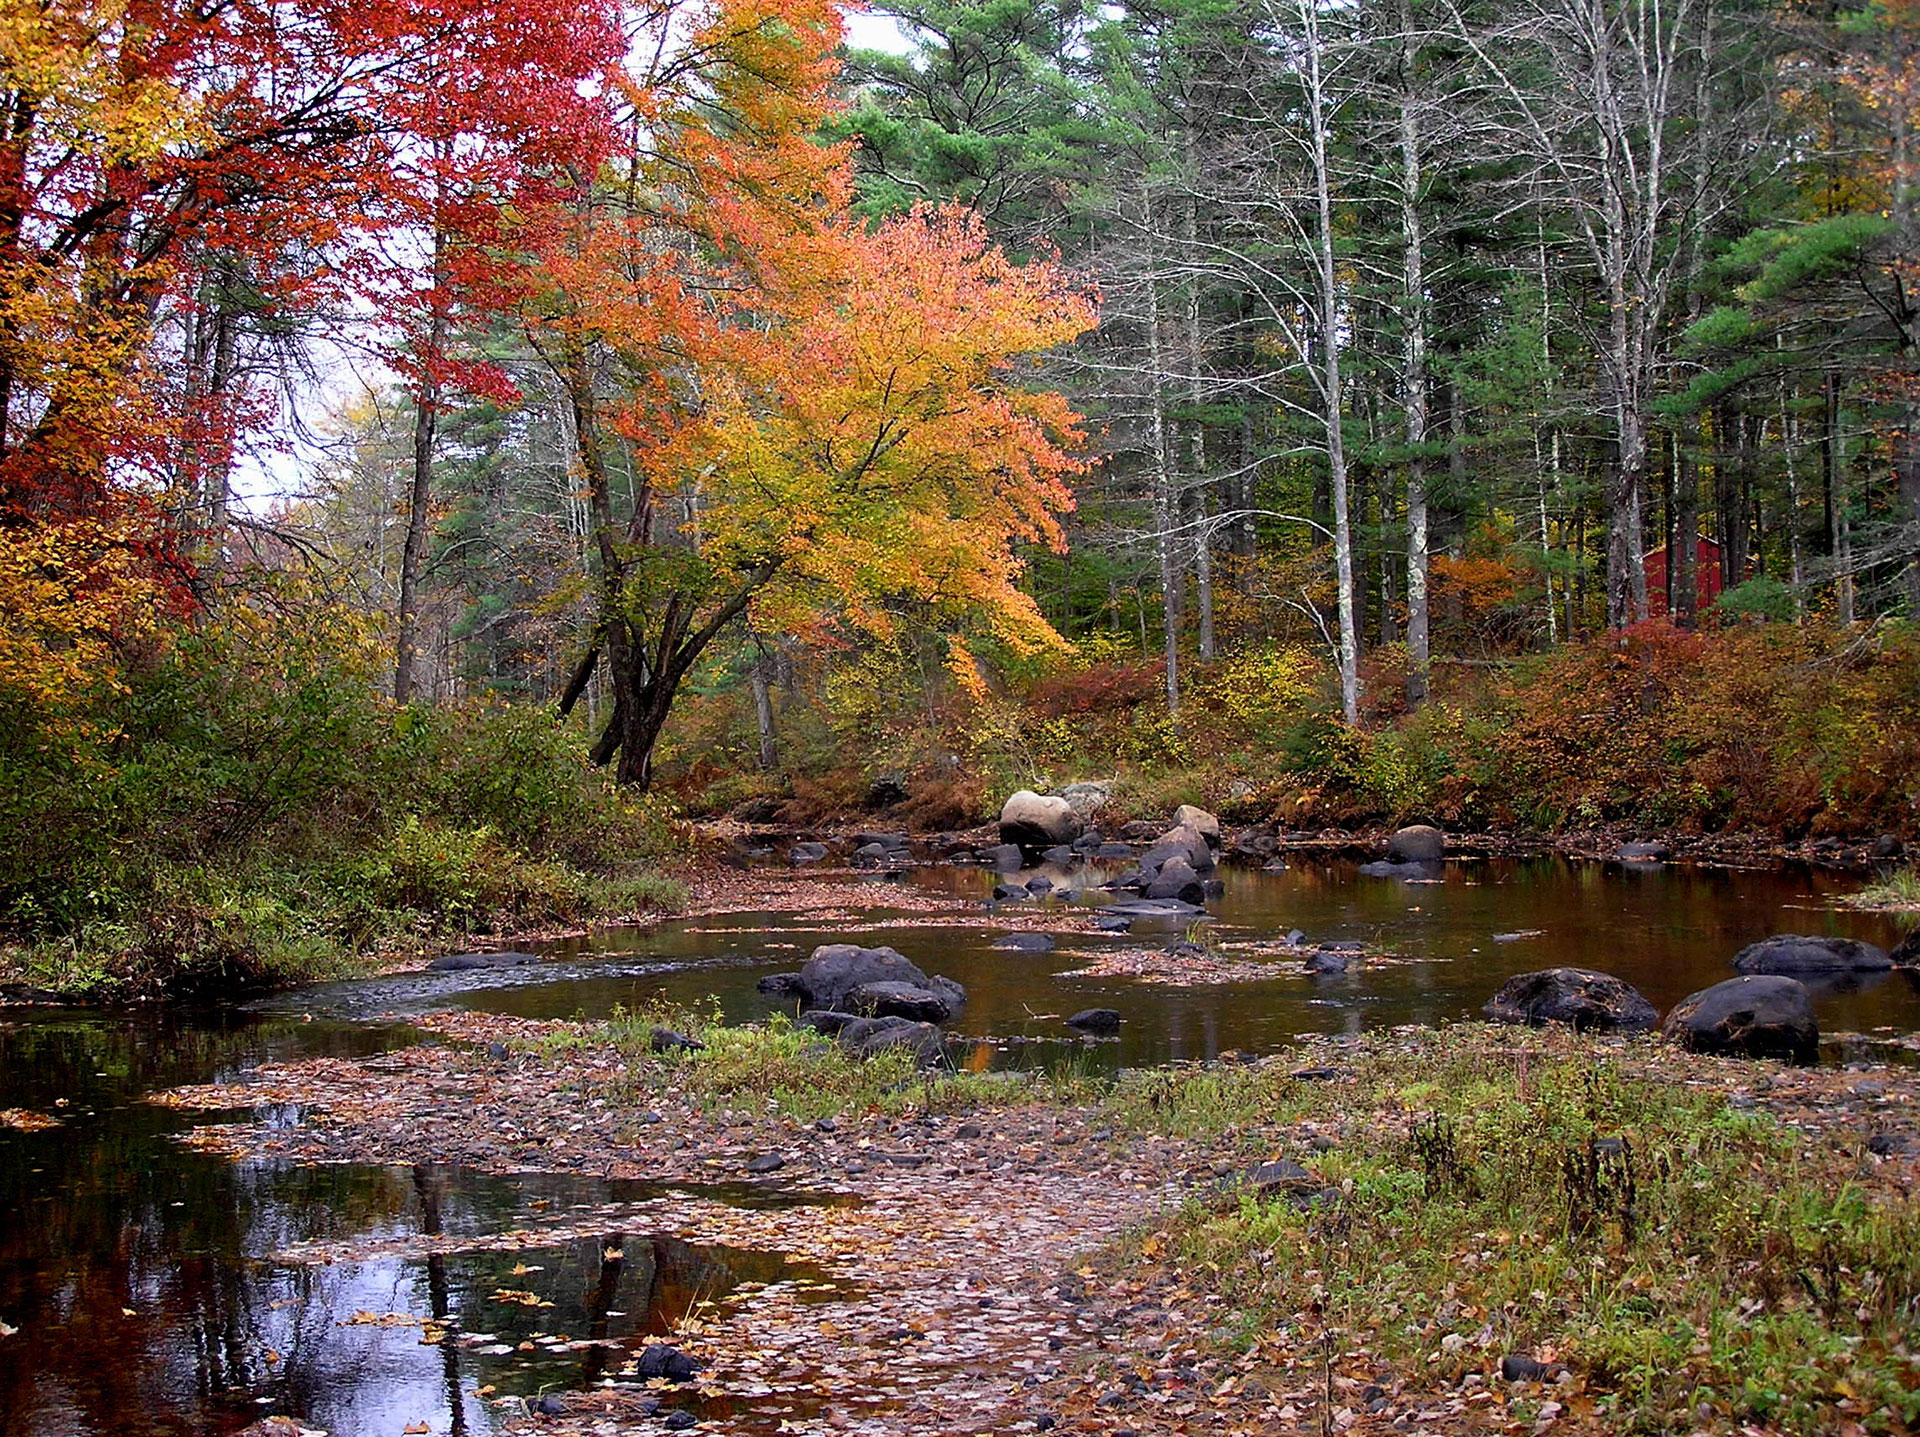 A stream surrounded by trees in the fall